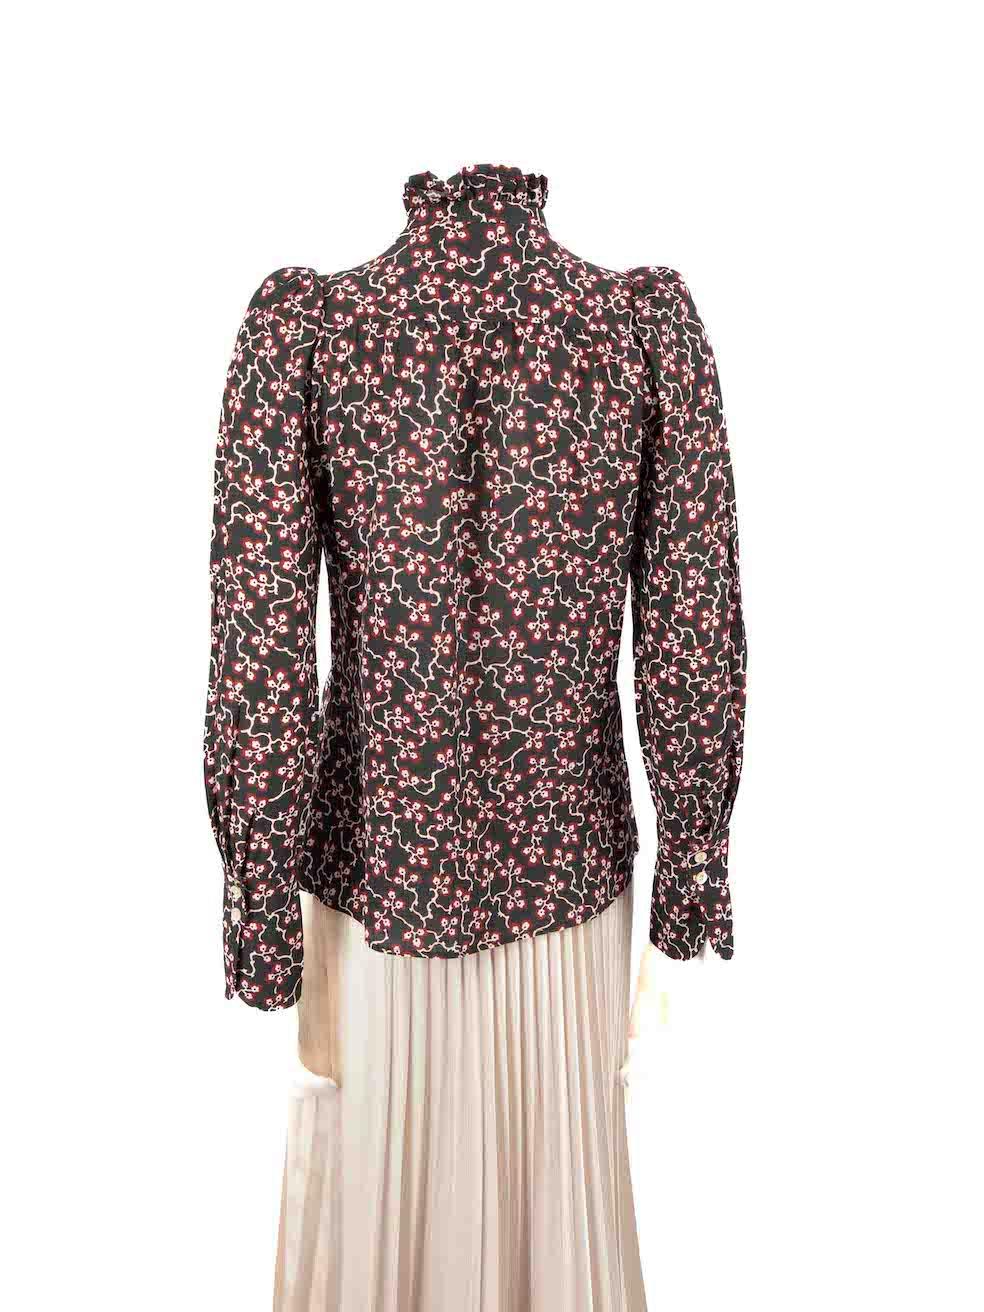 Isabel Marant Floral Pattern Silk Blouse Size S In Excellent Condition For Sale In London, GB